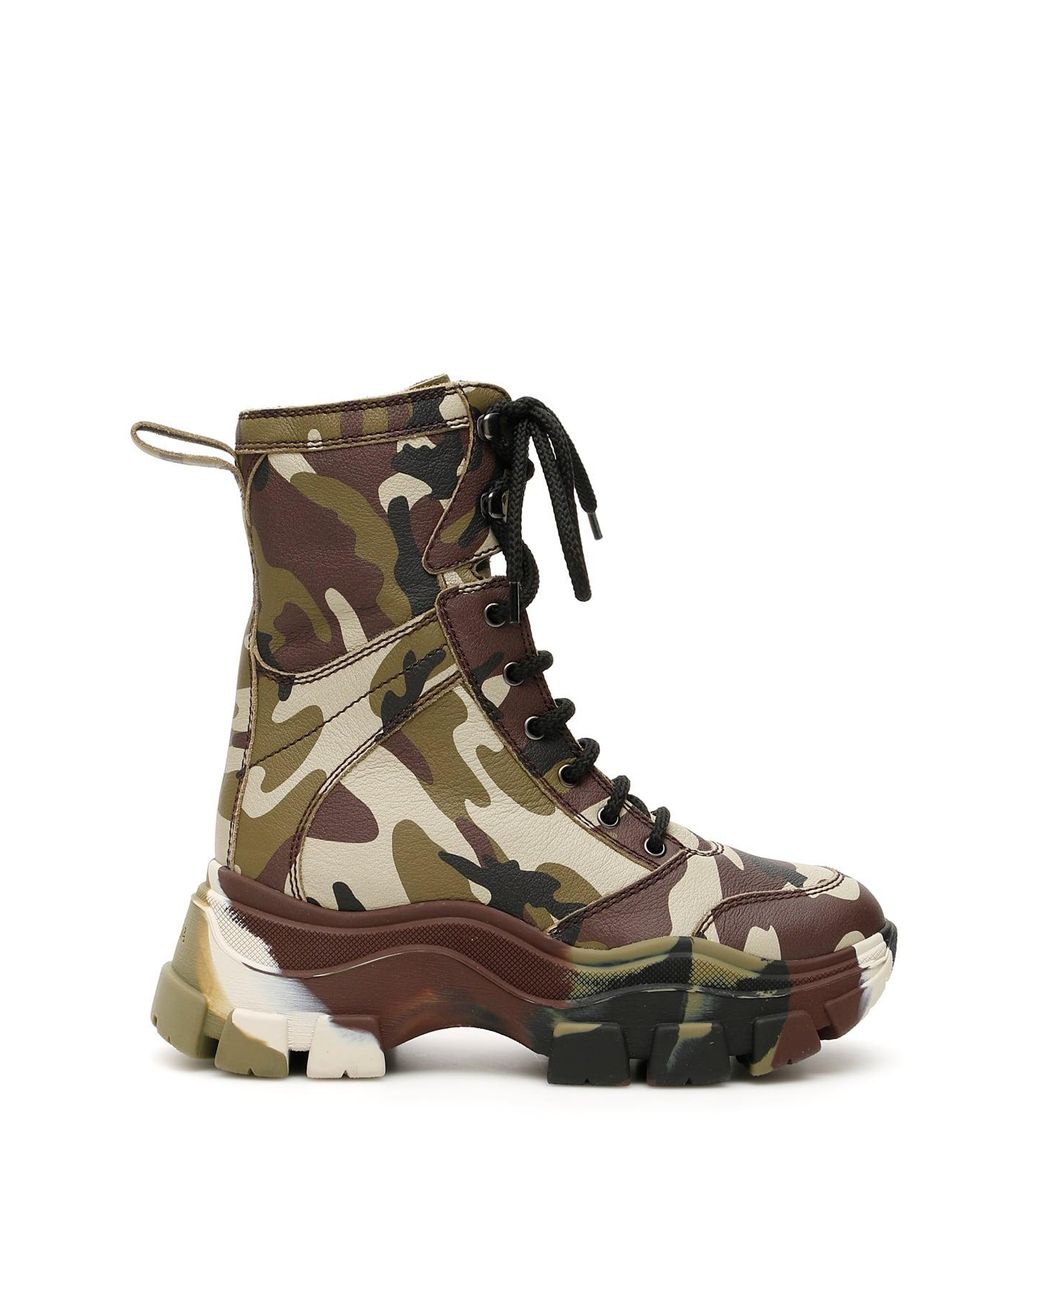 Prada Leather Camouflage Combat Boots in Green,Brown,Beige (Green) | Lyst